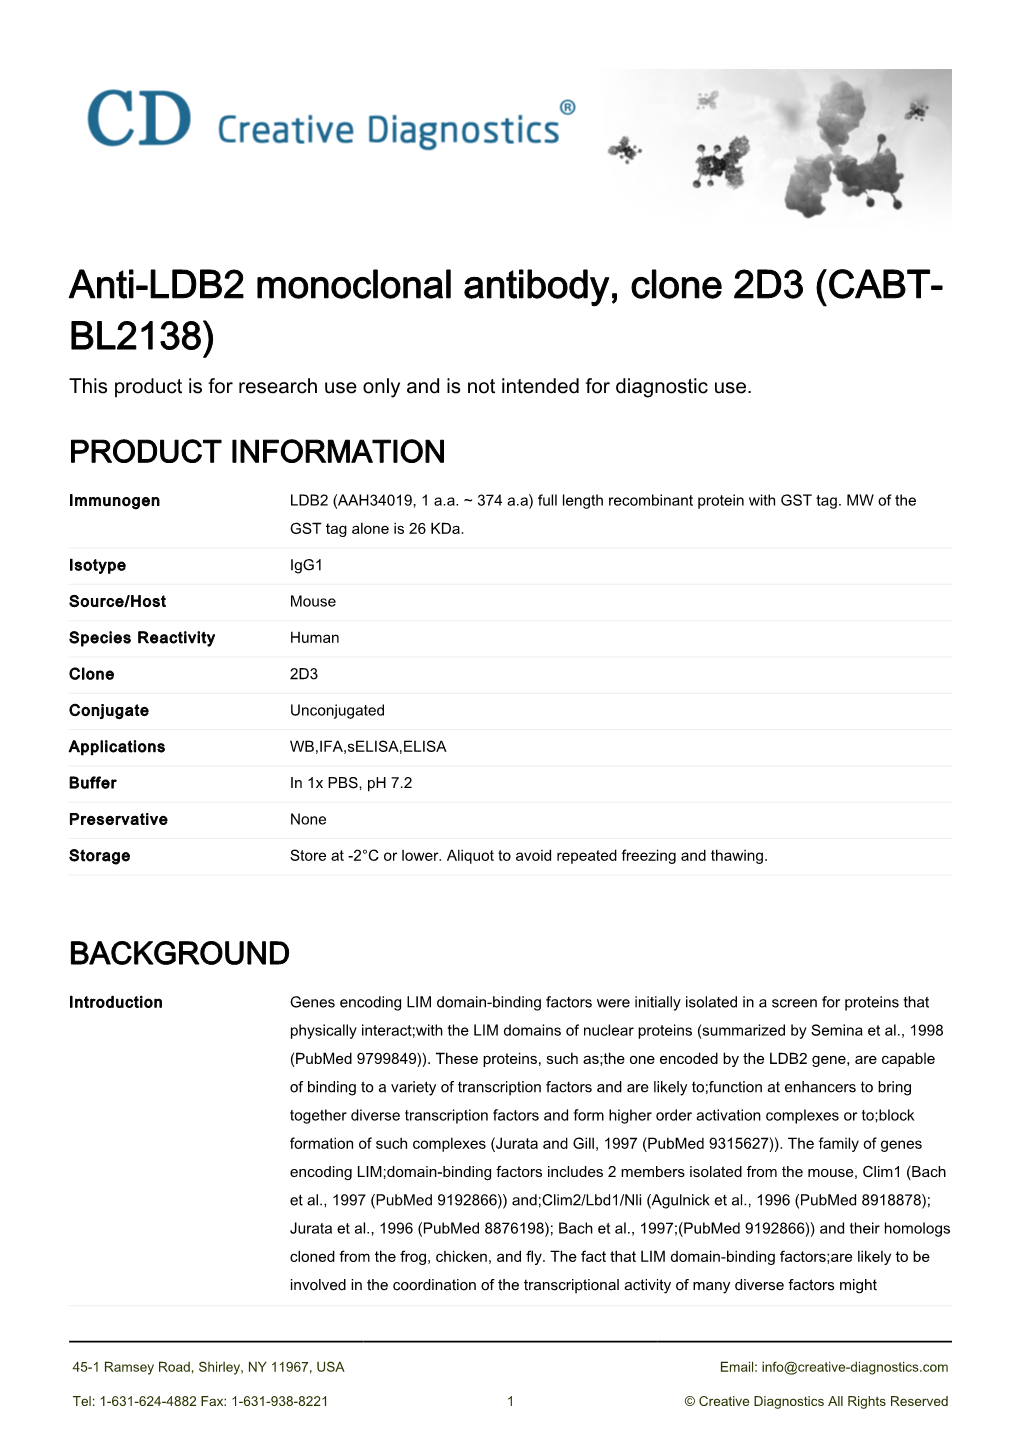 Anti-LDB2 Monoclonal Antibody, Clone 2D3 (CABT- BL2138) This Product Is for Research Use Only and Is Not Intended for Diagnostic Use